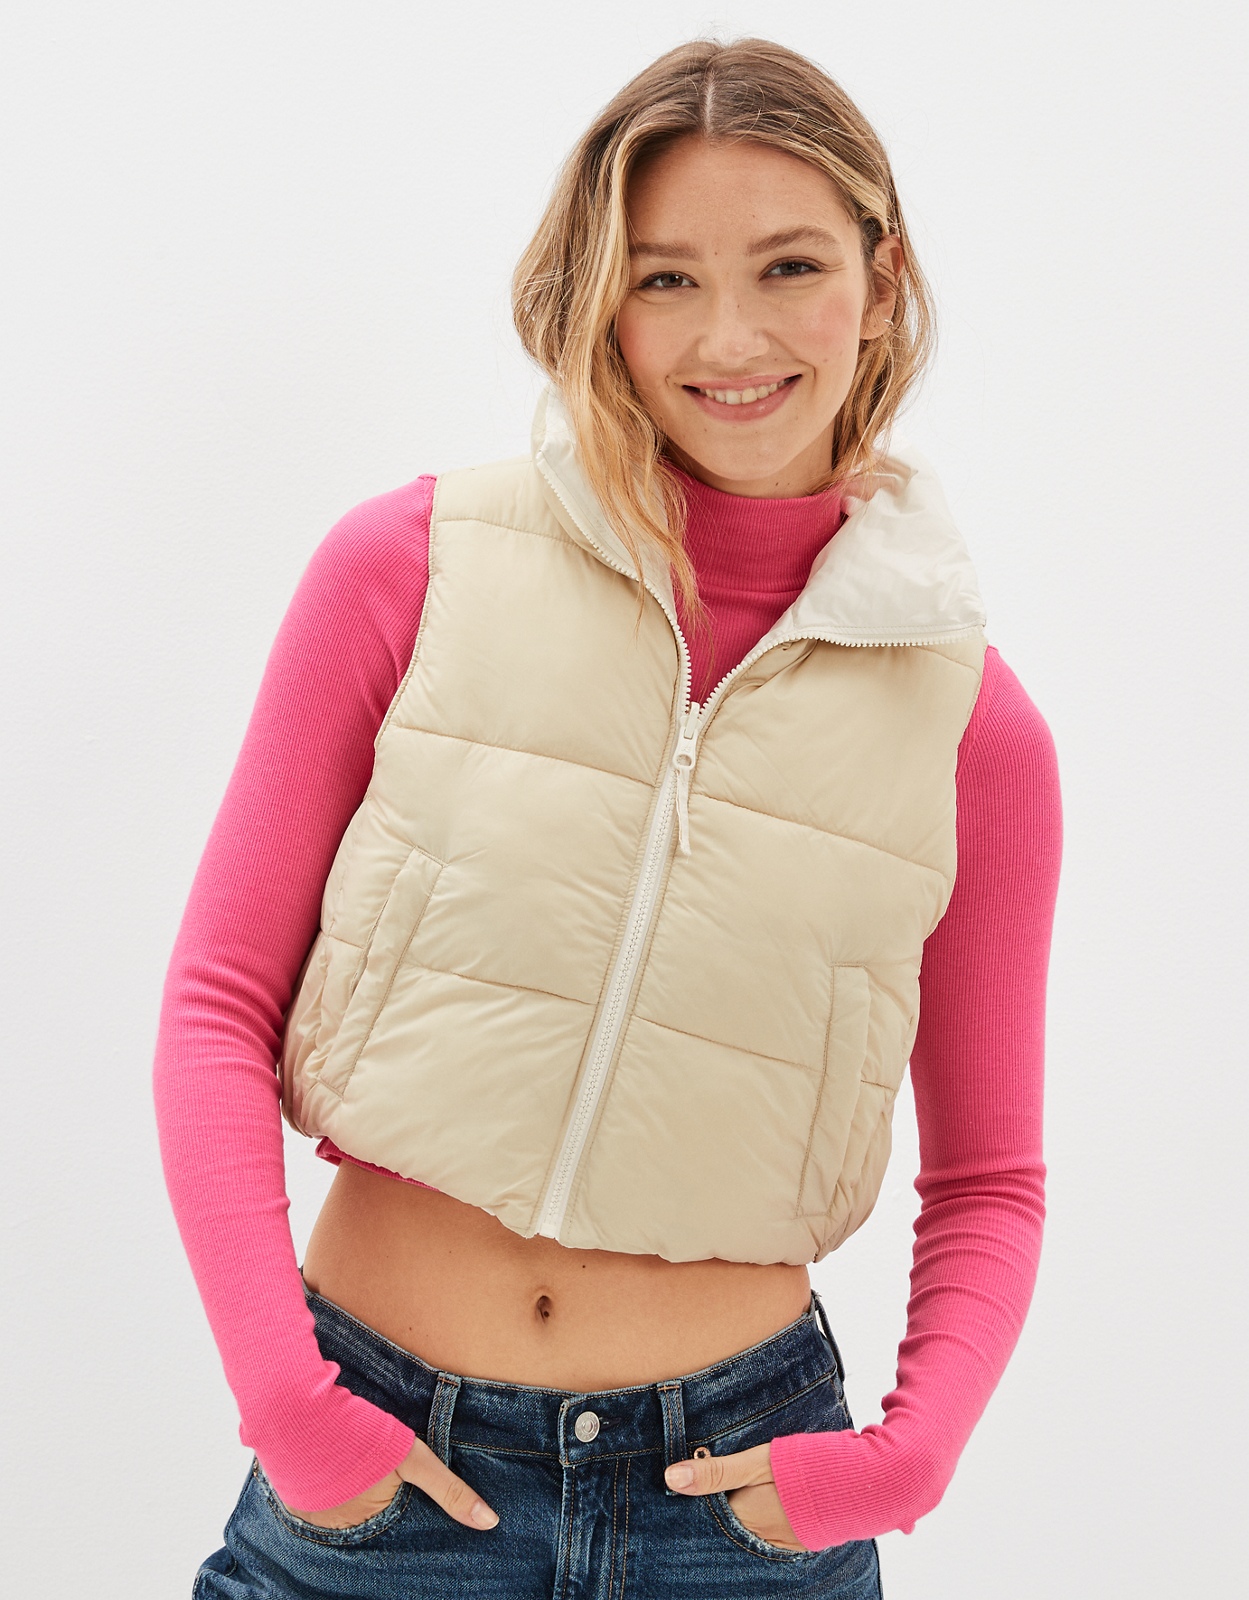 Ae Women's Cropped Puffer Vest